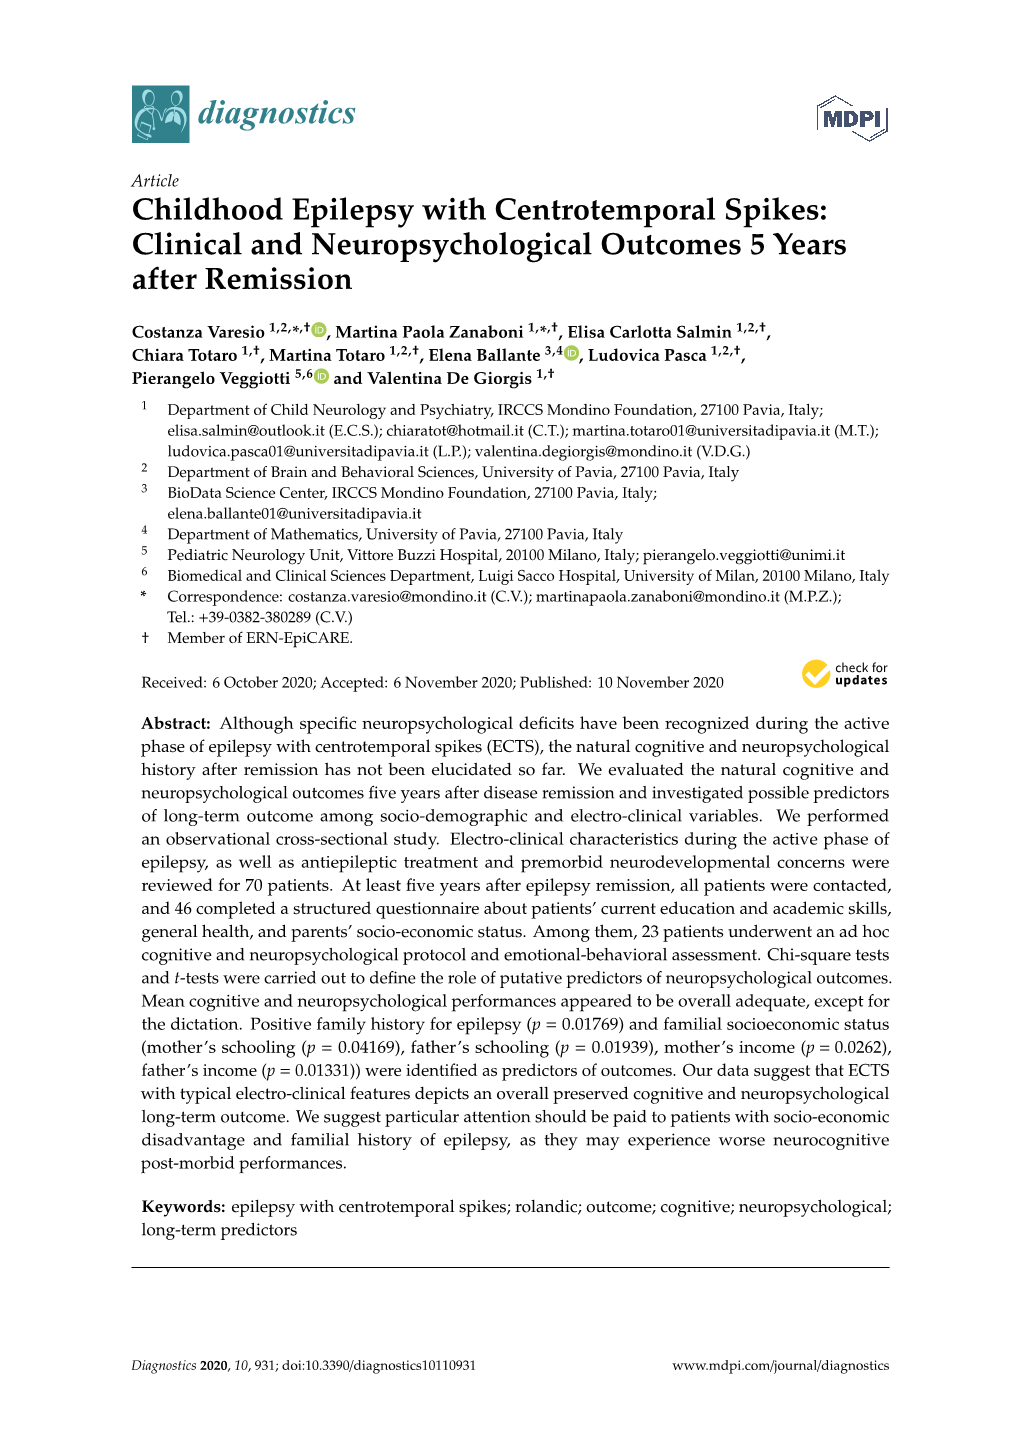 Childhood Epilepsy with Centrotemporal Spikes: Clinical and Neuropsychological Outcomes 5 Years After Remission